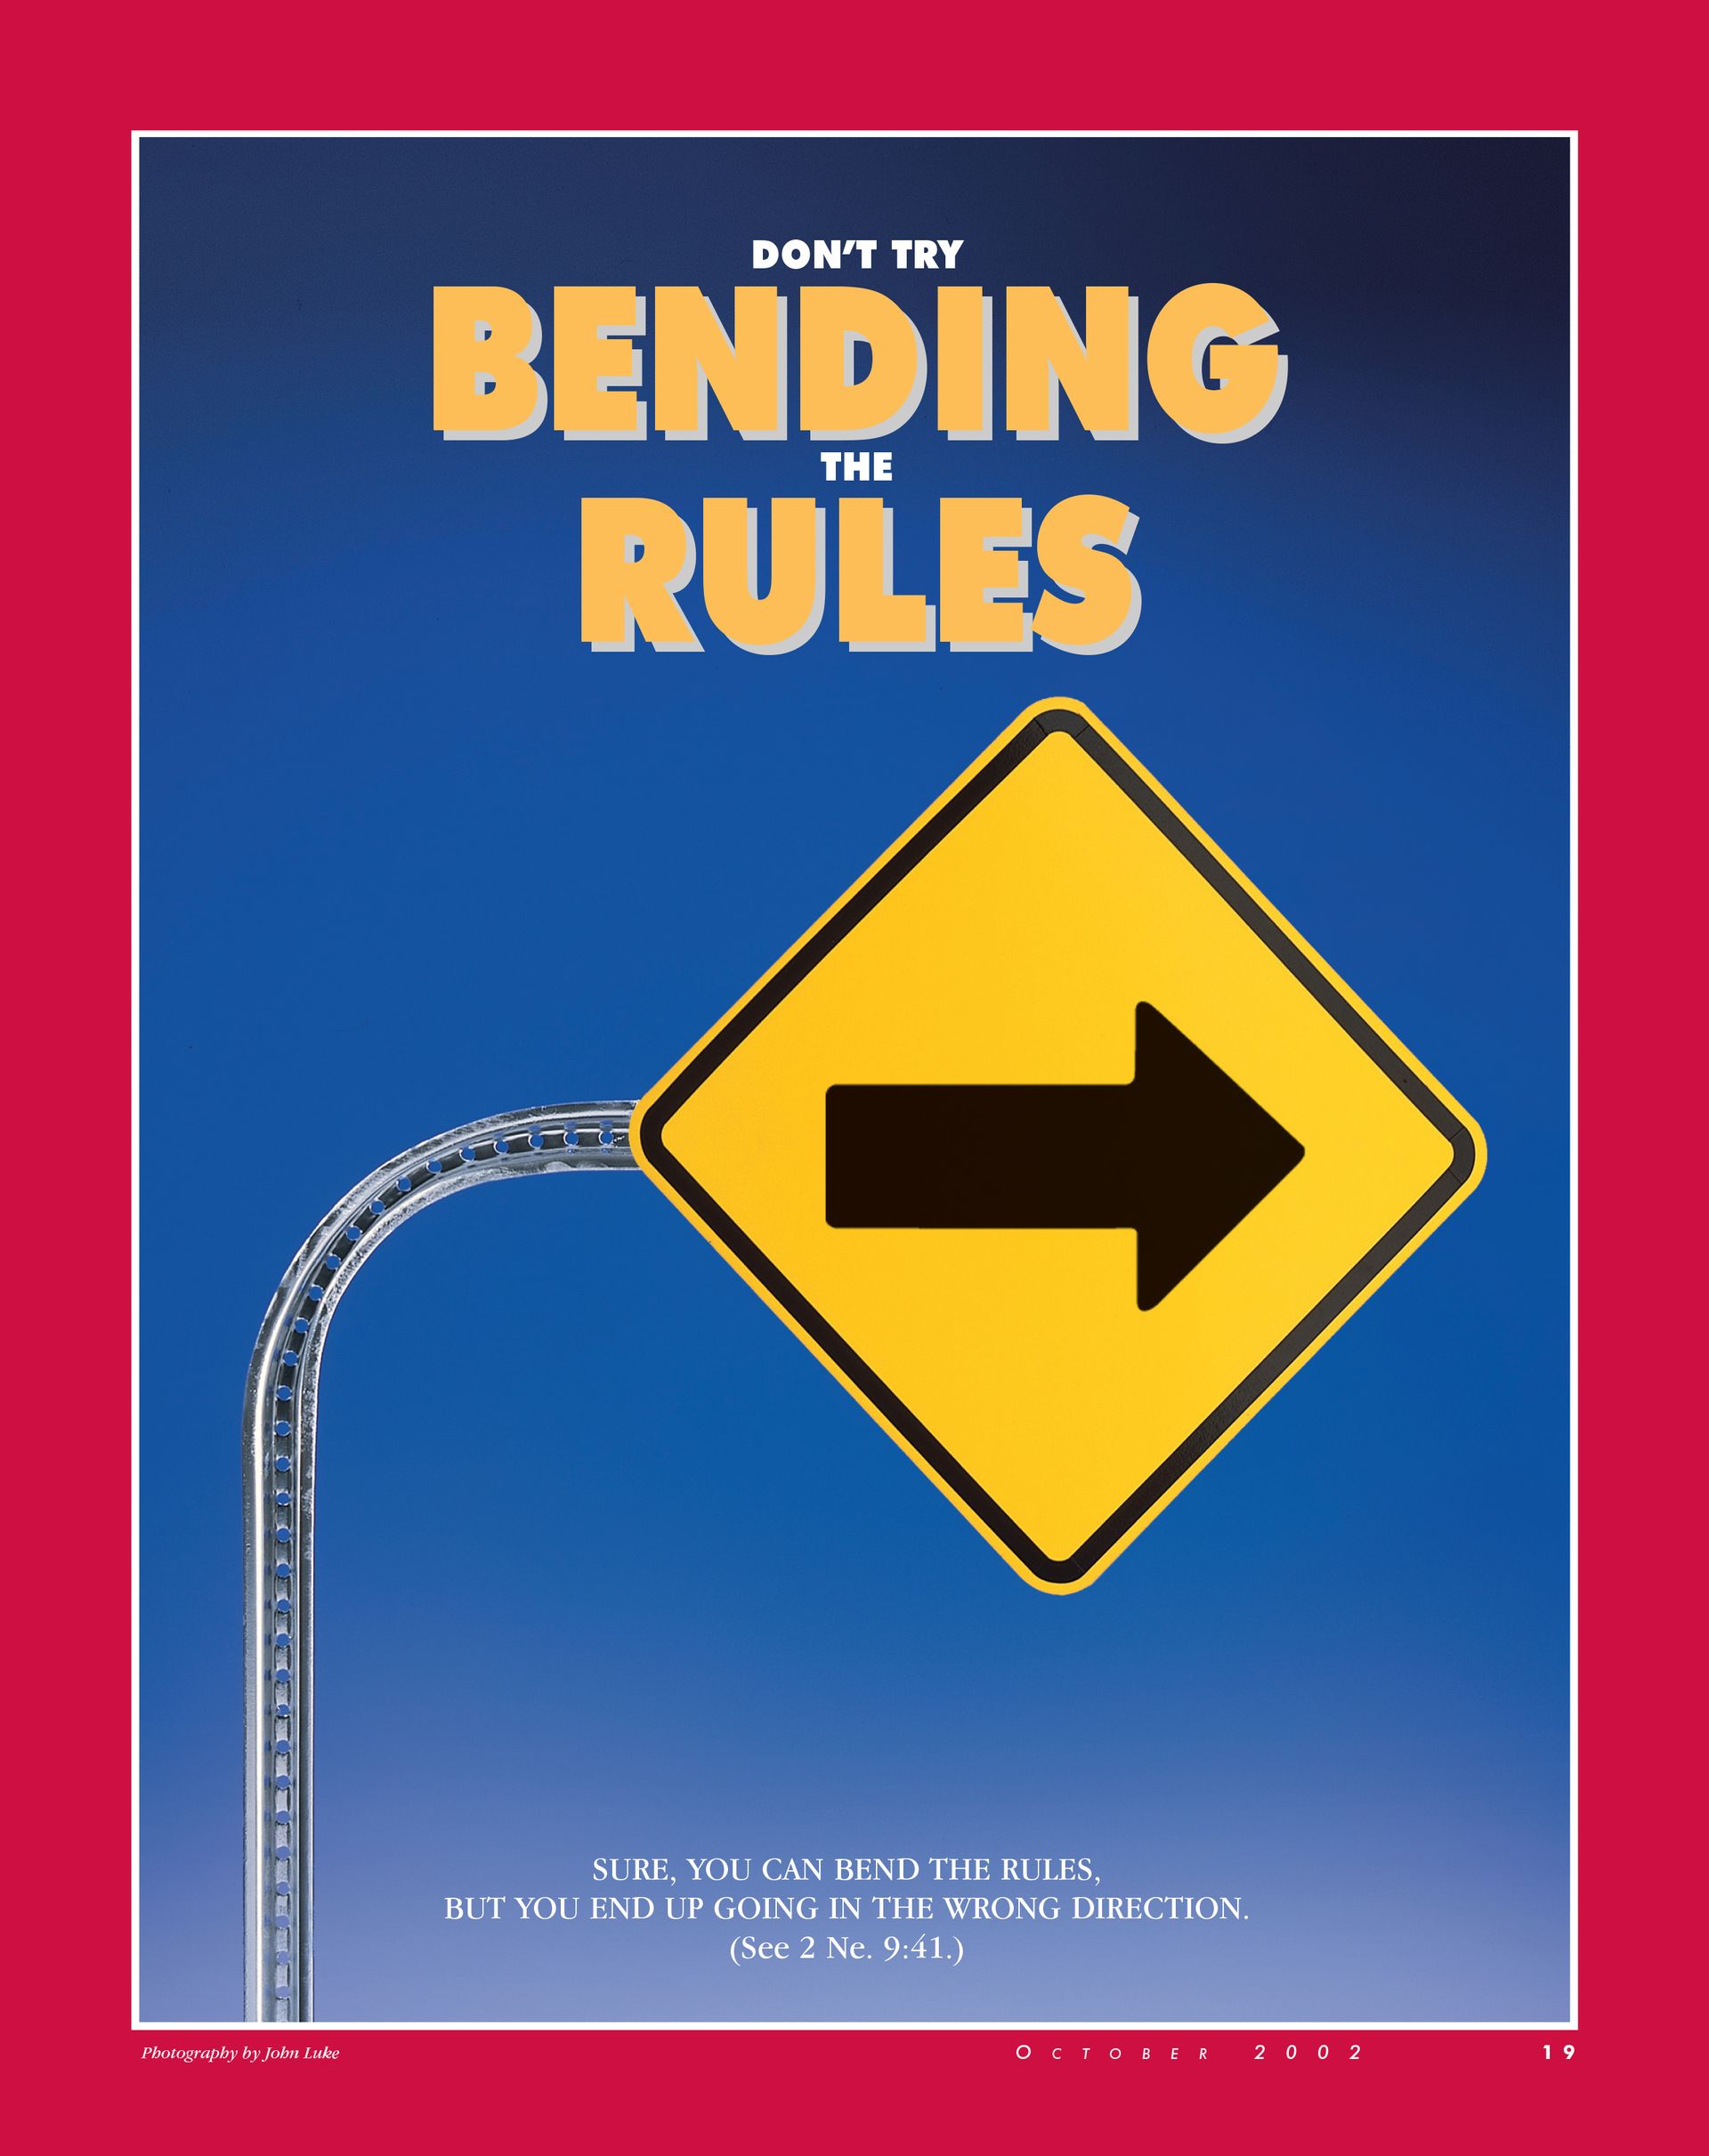 Don't Try Bending the Rules. Sure, you can bend the rules, but you end up going in the wrong direction. (See 2 Ne. 9:41.) Oct. 2002 © undefined ipCode 1.